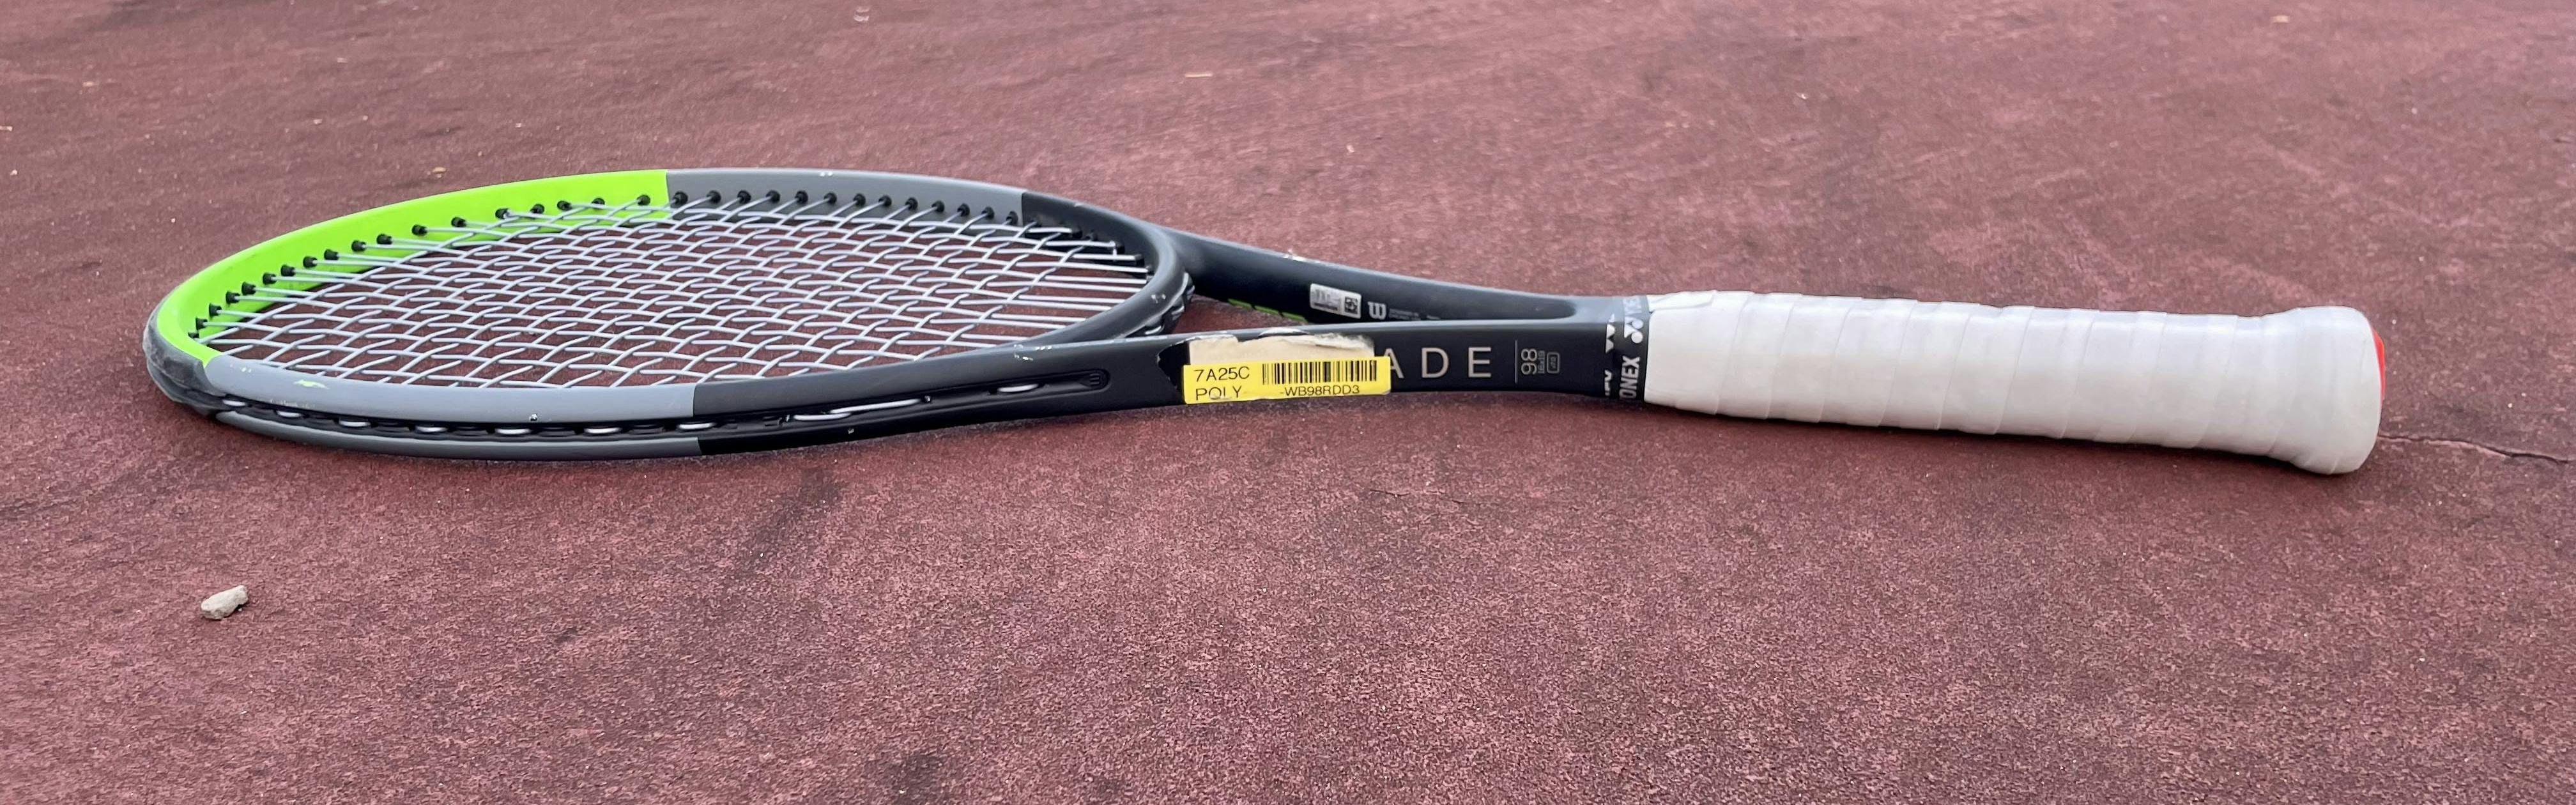 The Wilson Blade 98 V7 Racquet lying on a court. 